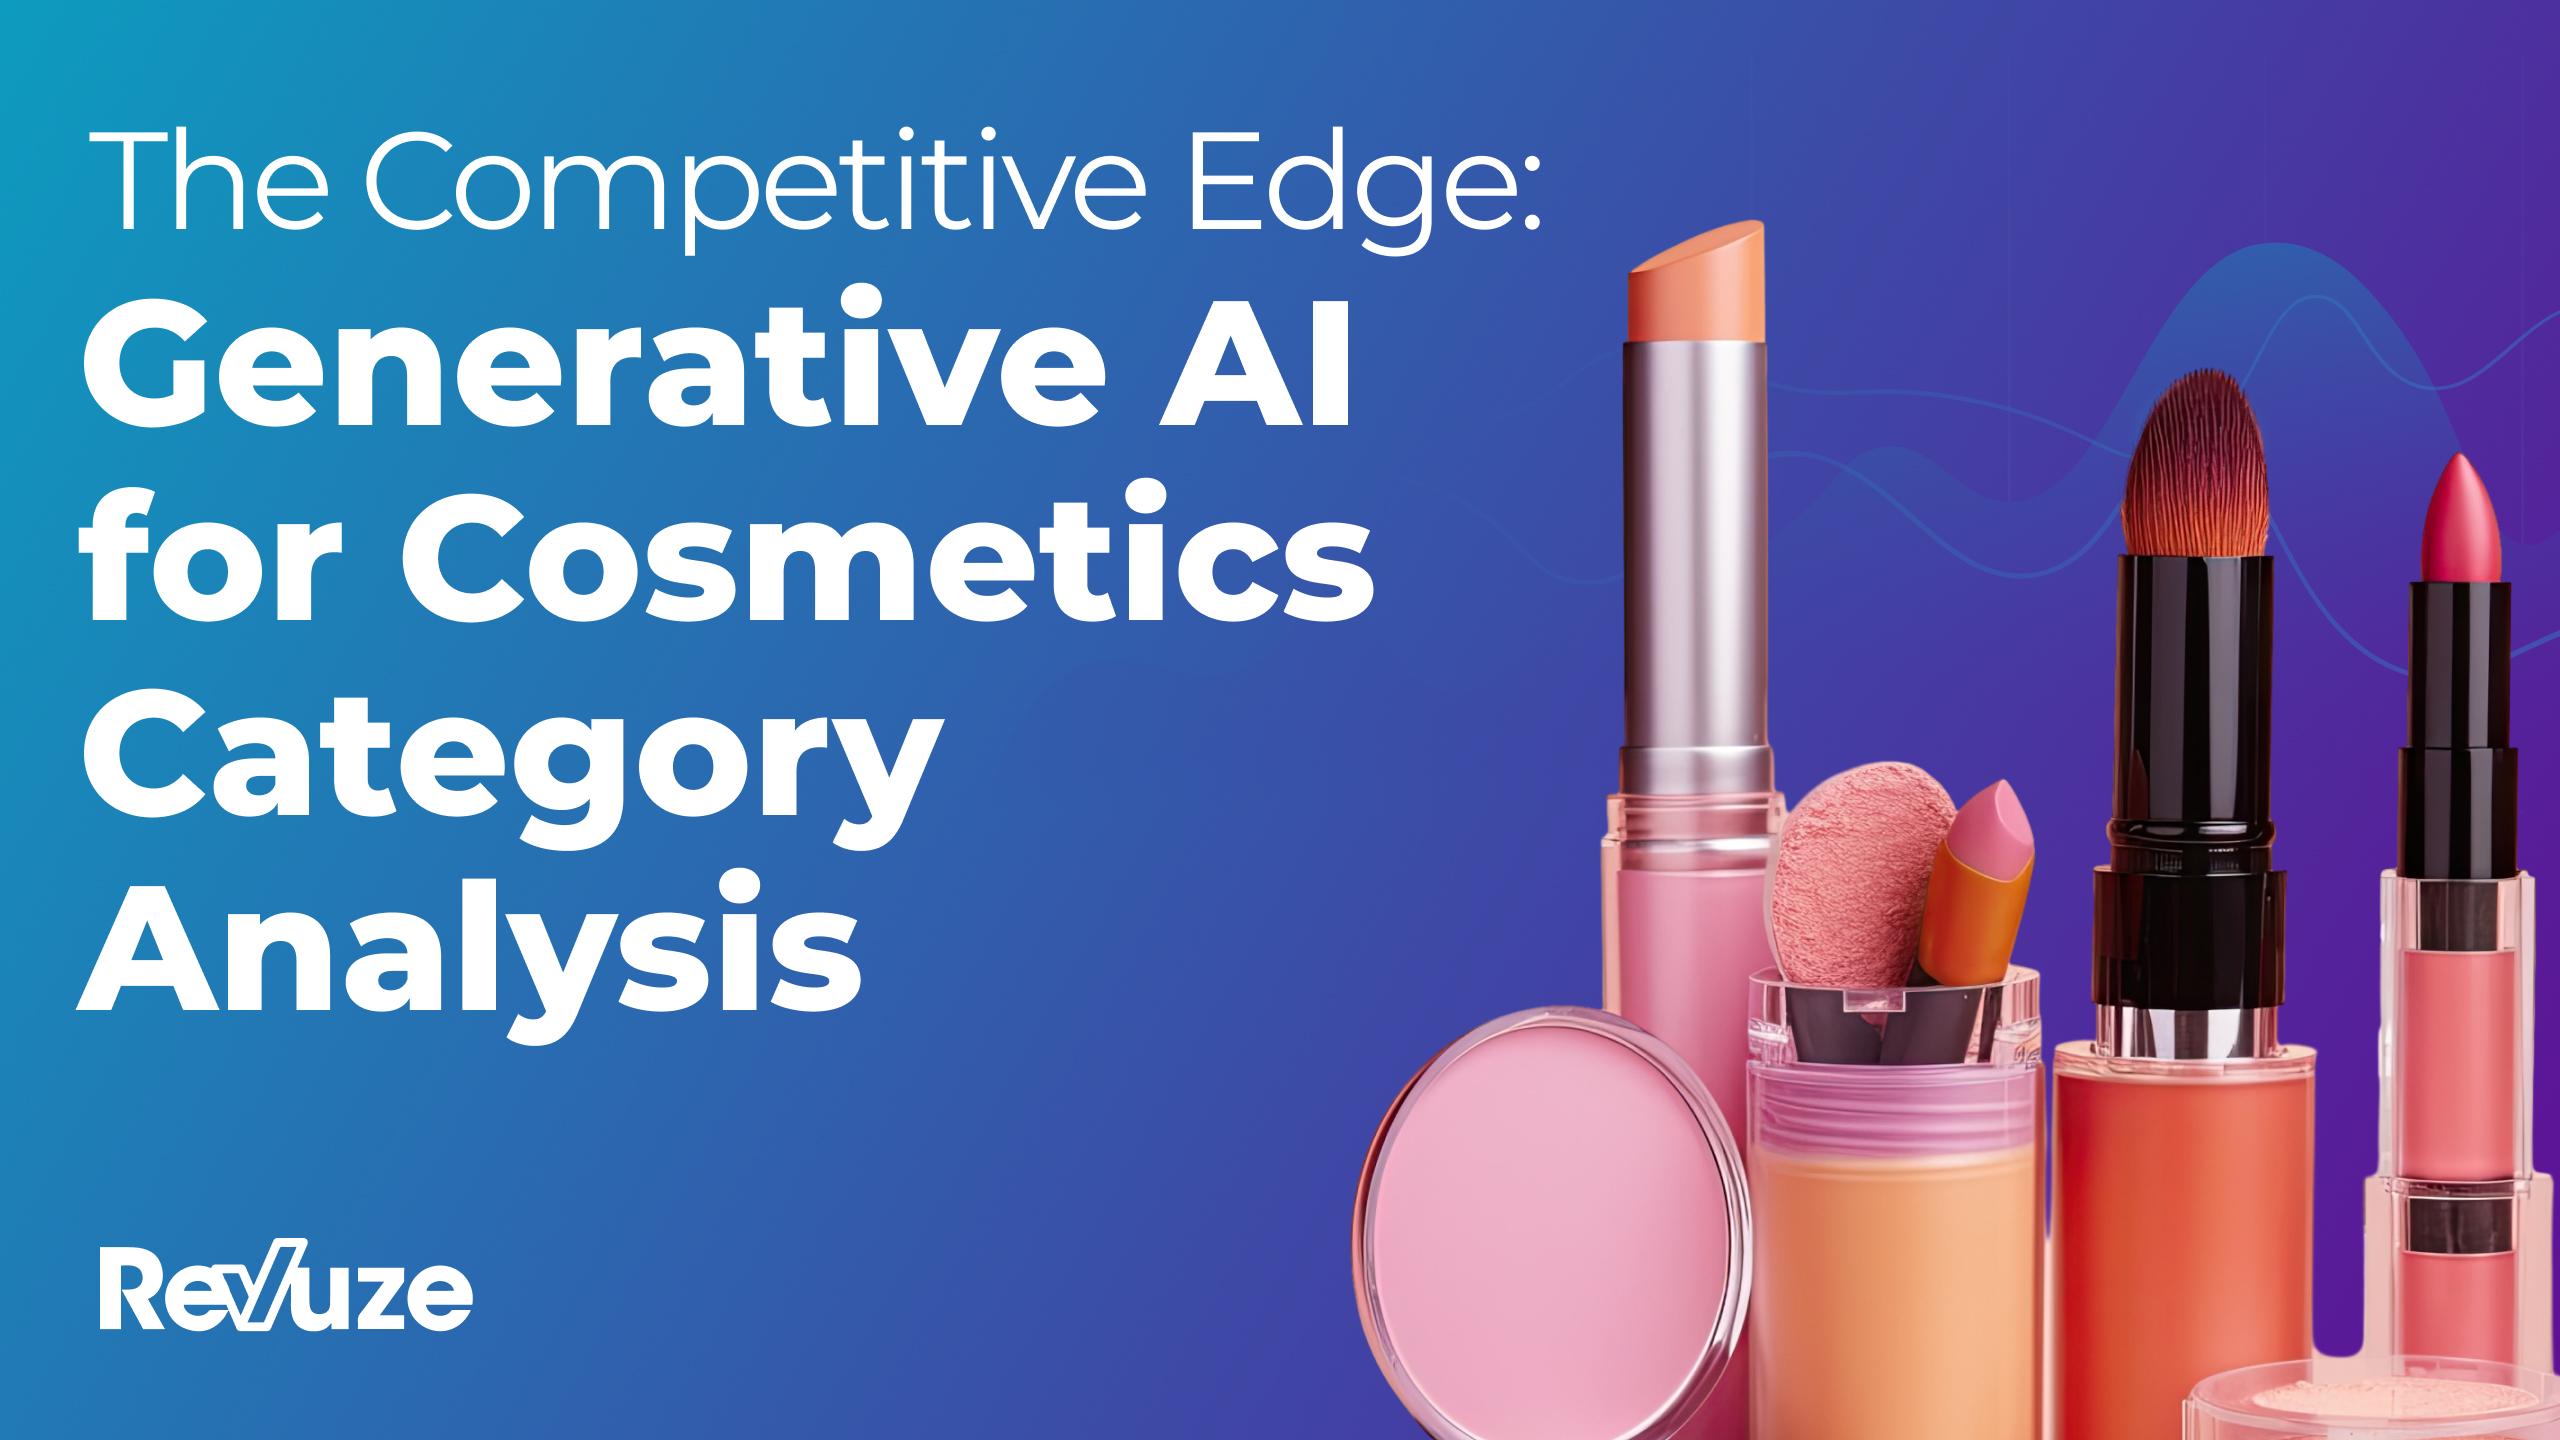 The Competitive Edge: Generative AI for Cosmetics Category Analysis